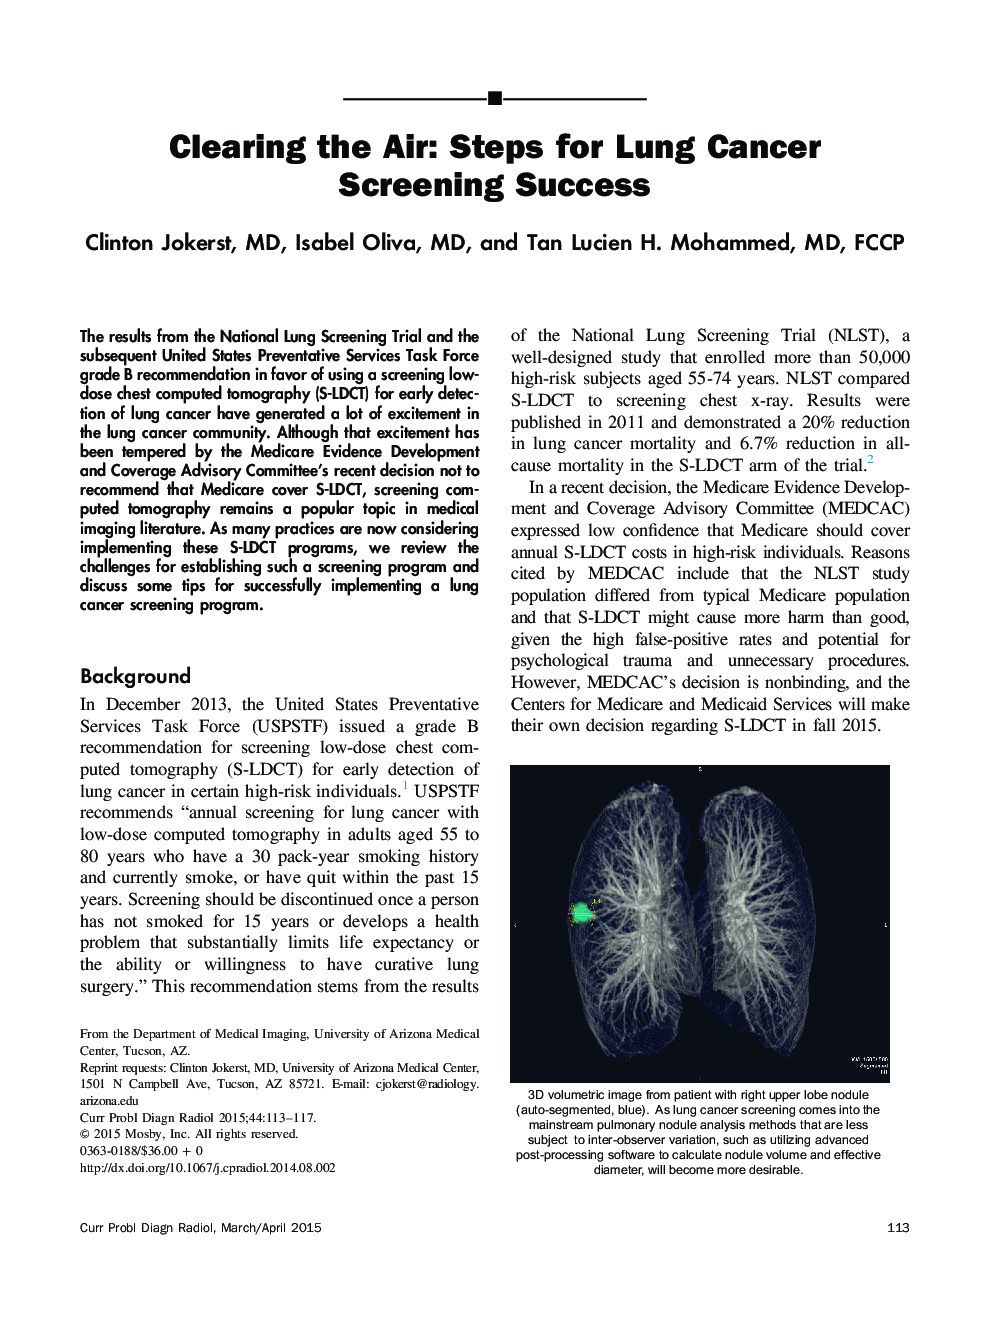 Clearing the Air: Steps for Lung Cancer Screening Success